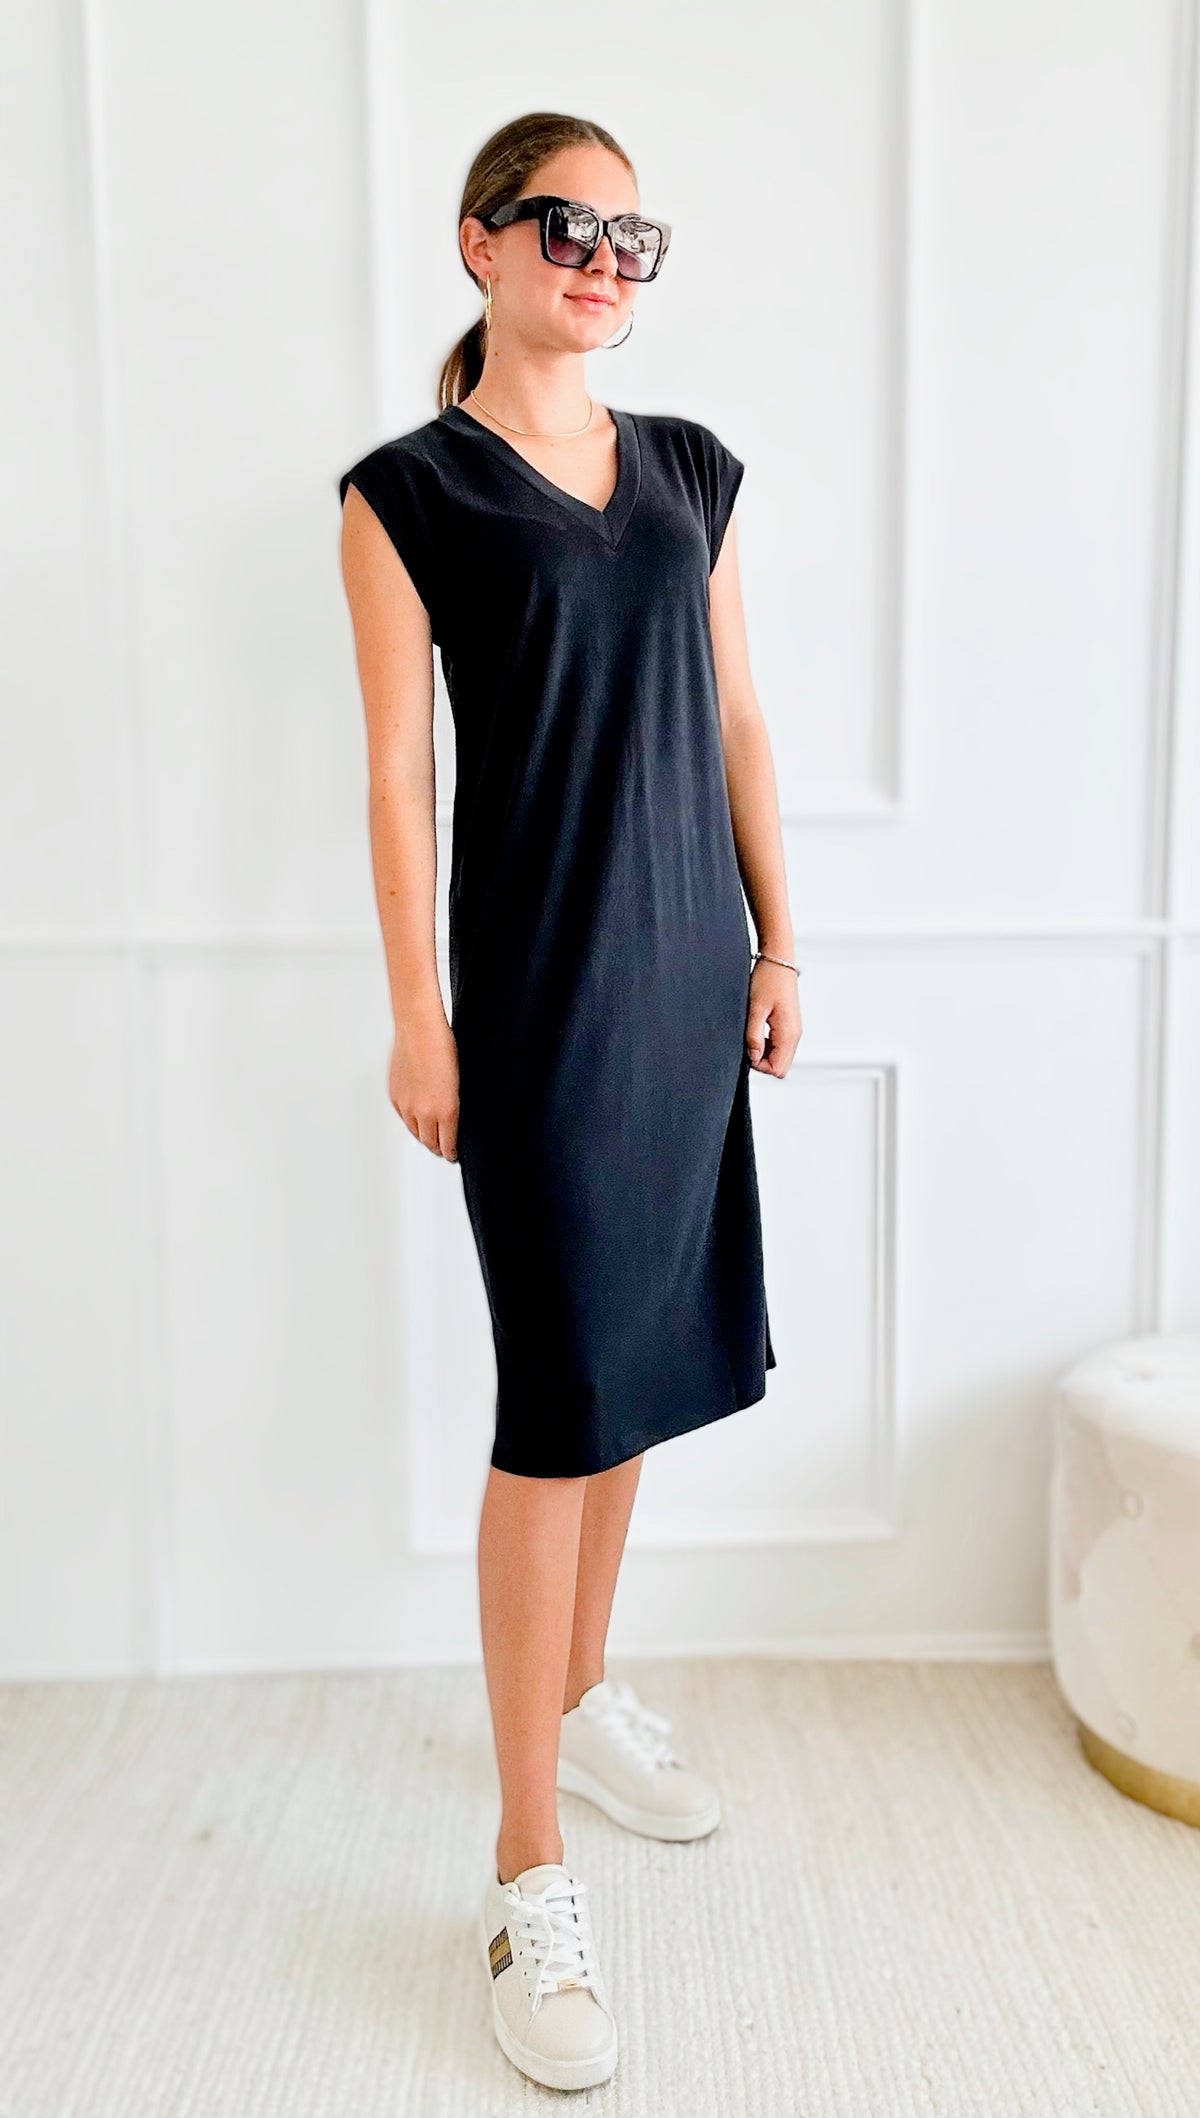 V-Neck Short Sleeve Dress-Black-200 dresses/jumpsuits/rompers-HYFVE-Coastal Bloom Boutique, find the trendiest versions of the popular styles and looks Located in Indialantic, FL